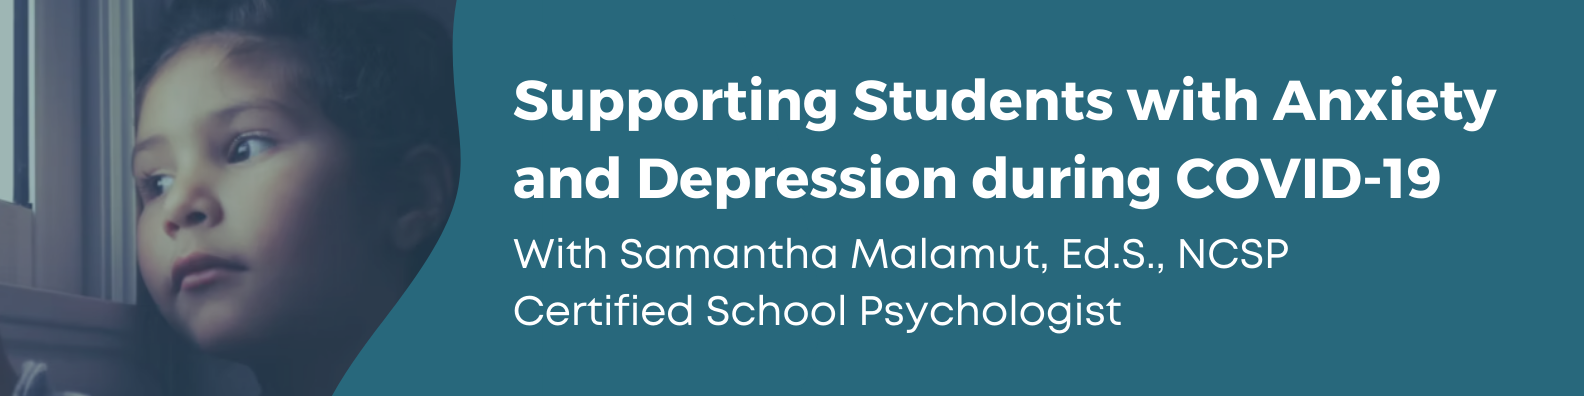 Supporting Students with Anxiety and Depression during COVID-19 with Samantha Malamut, Ed.S., NCSP Certified School Psychologist